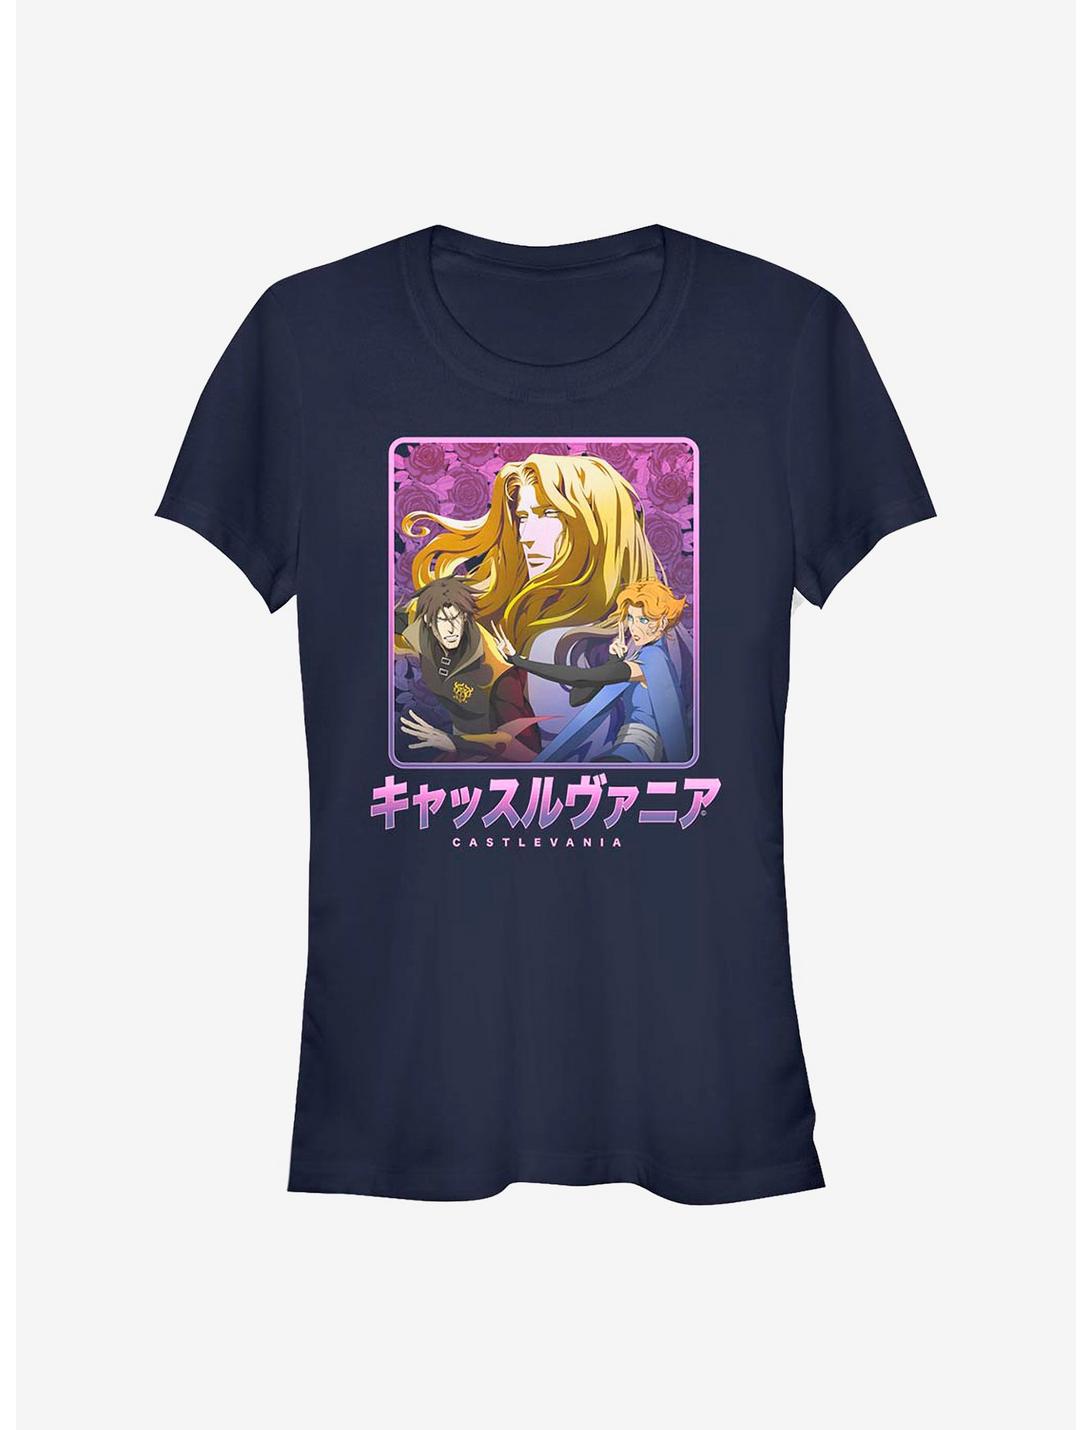 Castlevania Japanese Text Group Girls T-Shirt, NAVY, hi-res